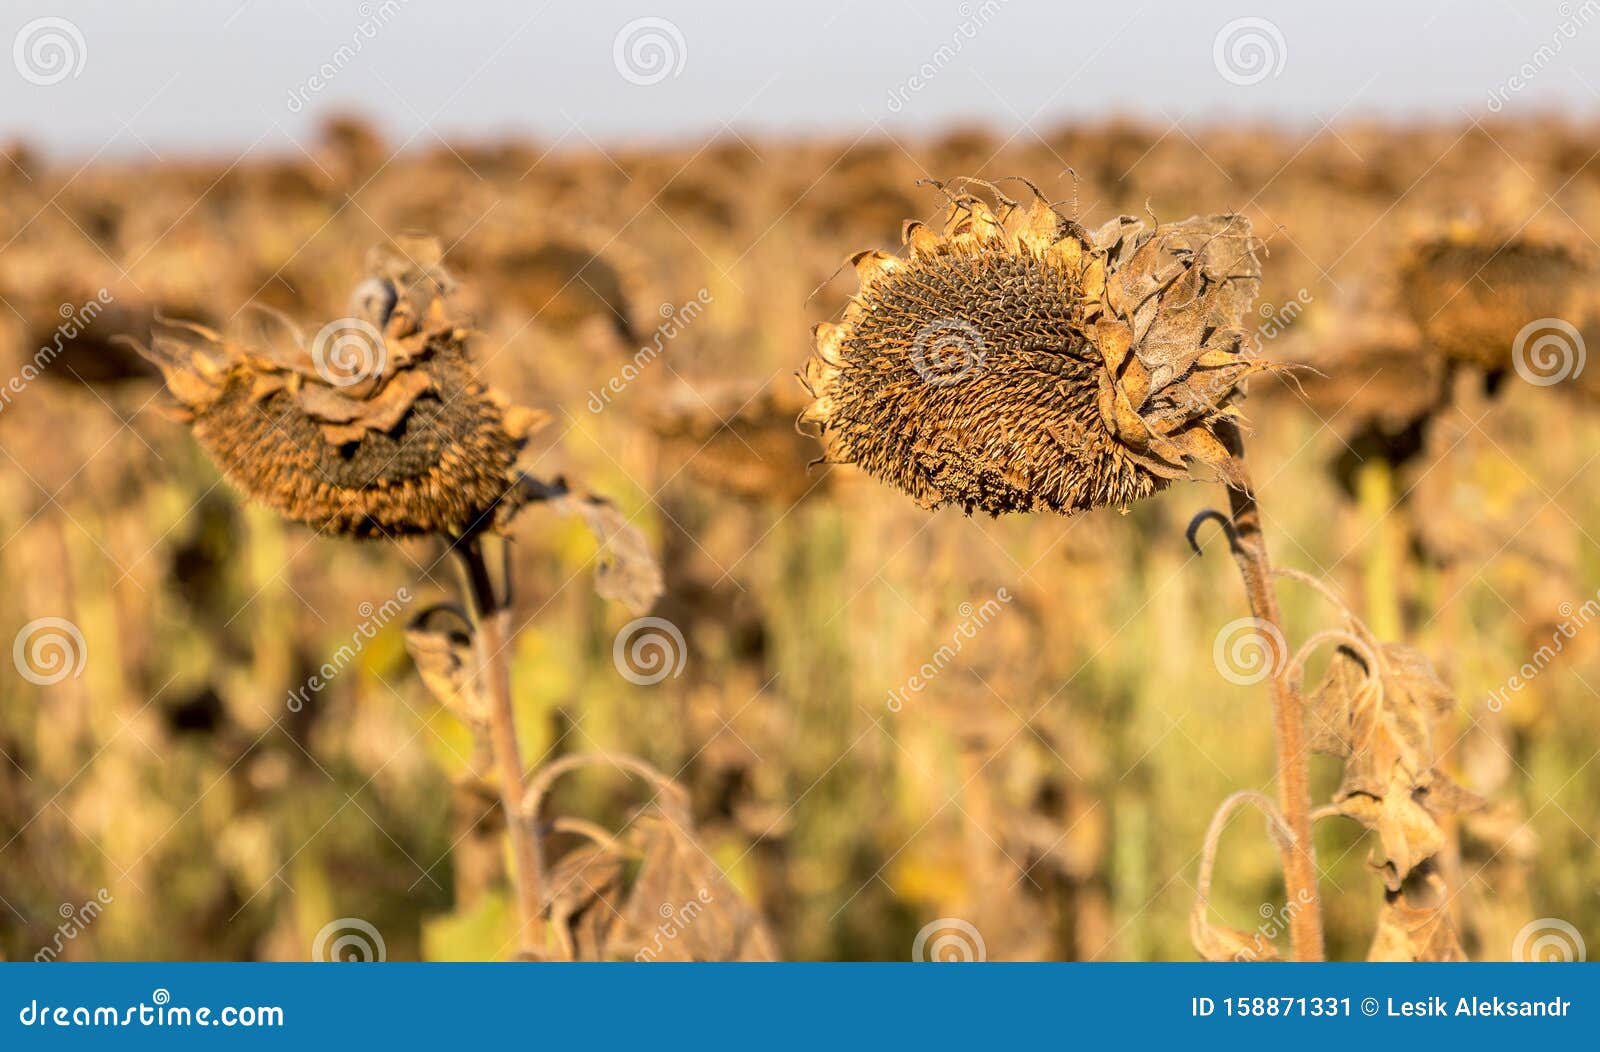 Withered Sunflowers in the Autumn Field. Mature Dry Sunflowers are ...